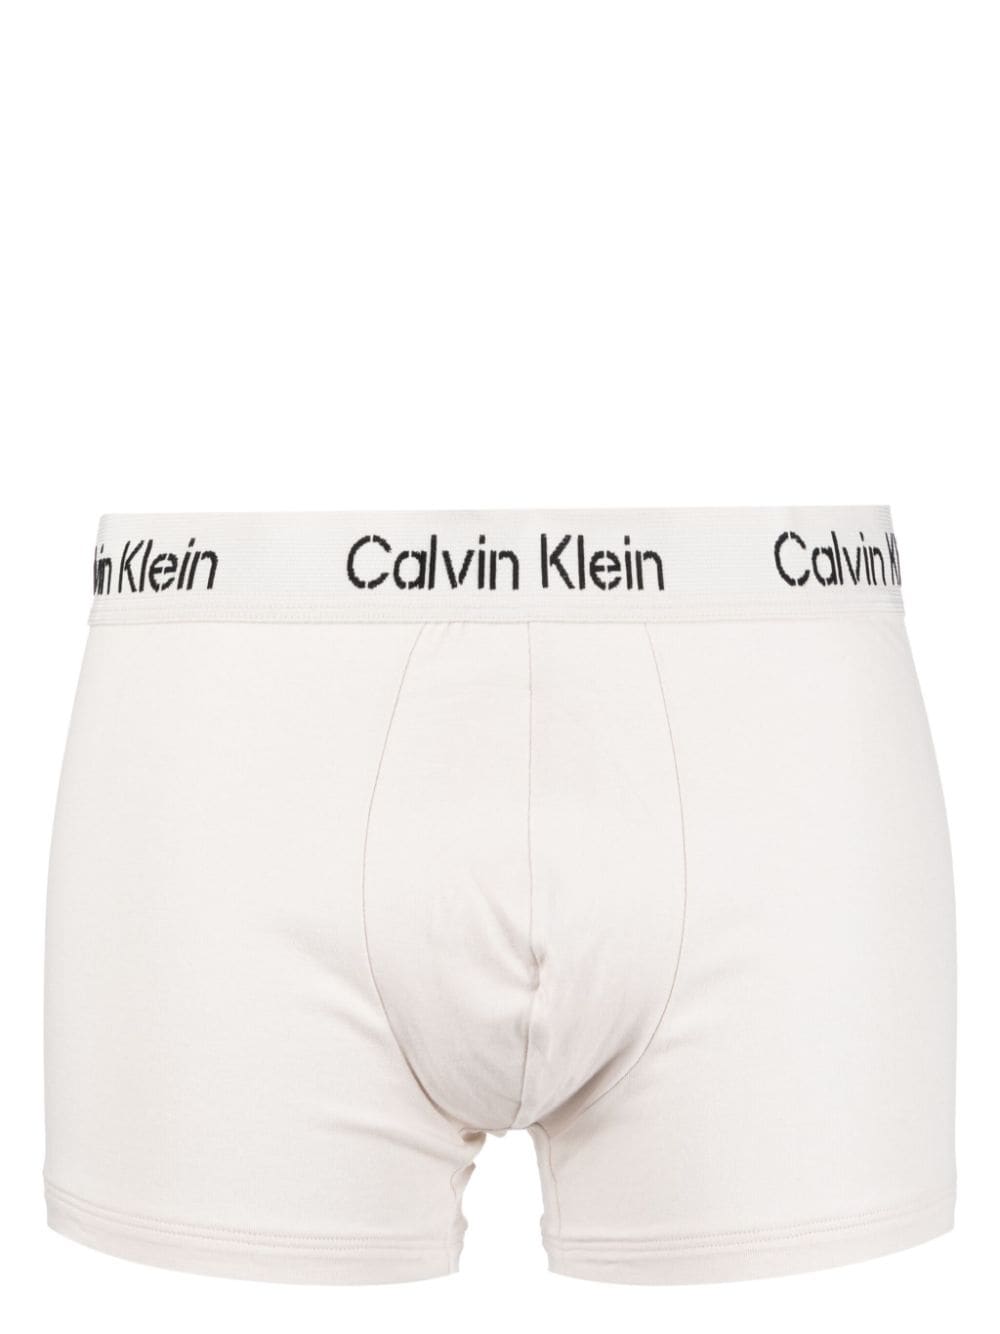 Image 2 of Calvin Klein logo-waistband boxers (pack of three)